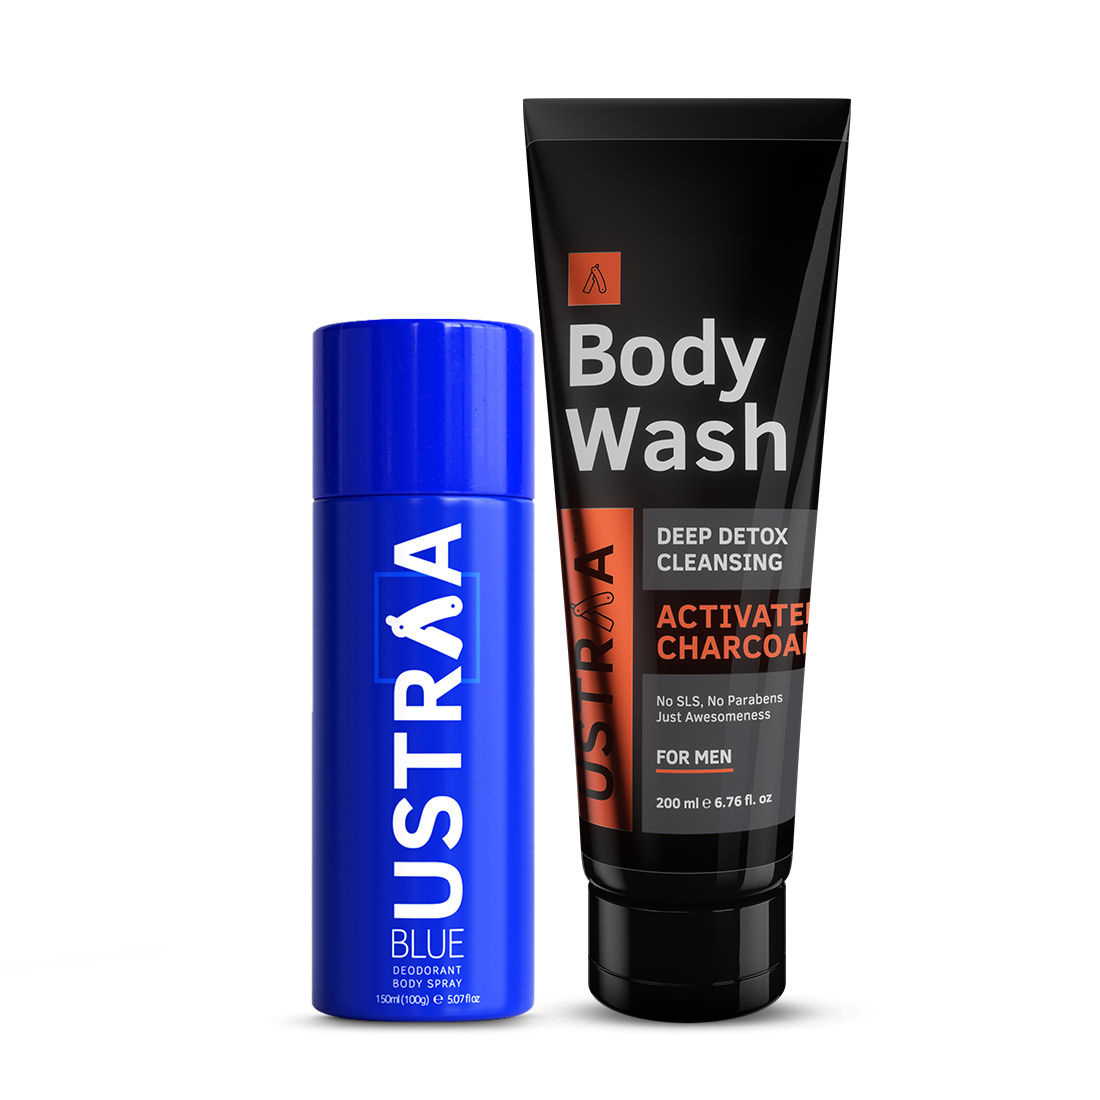 Ustraa Blue Deodorant & Body Wash Activated Charcoal